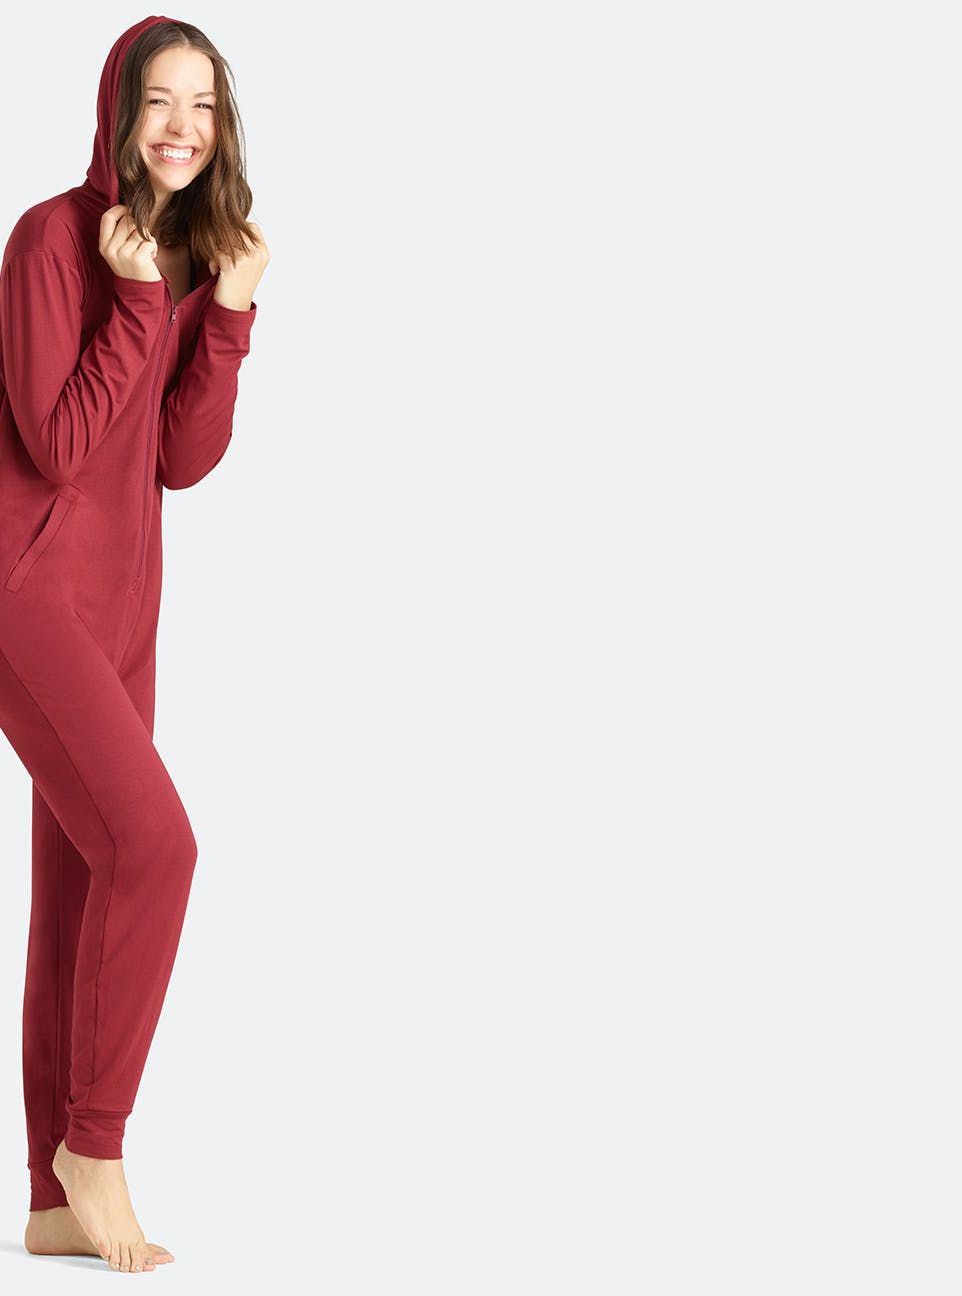 The Best Nightgowns and Pajamas to Pair With Your Slippers – Jill Burrows